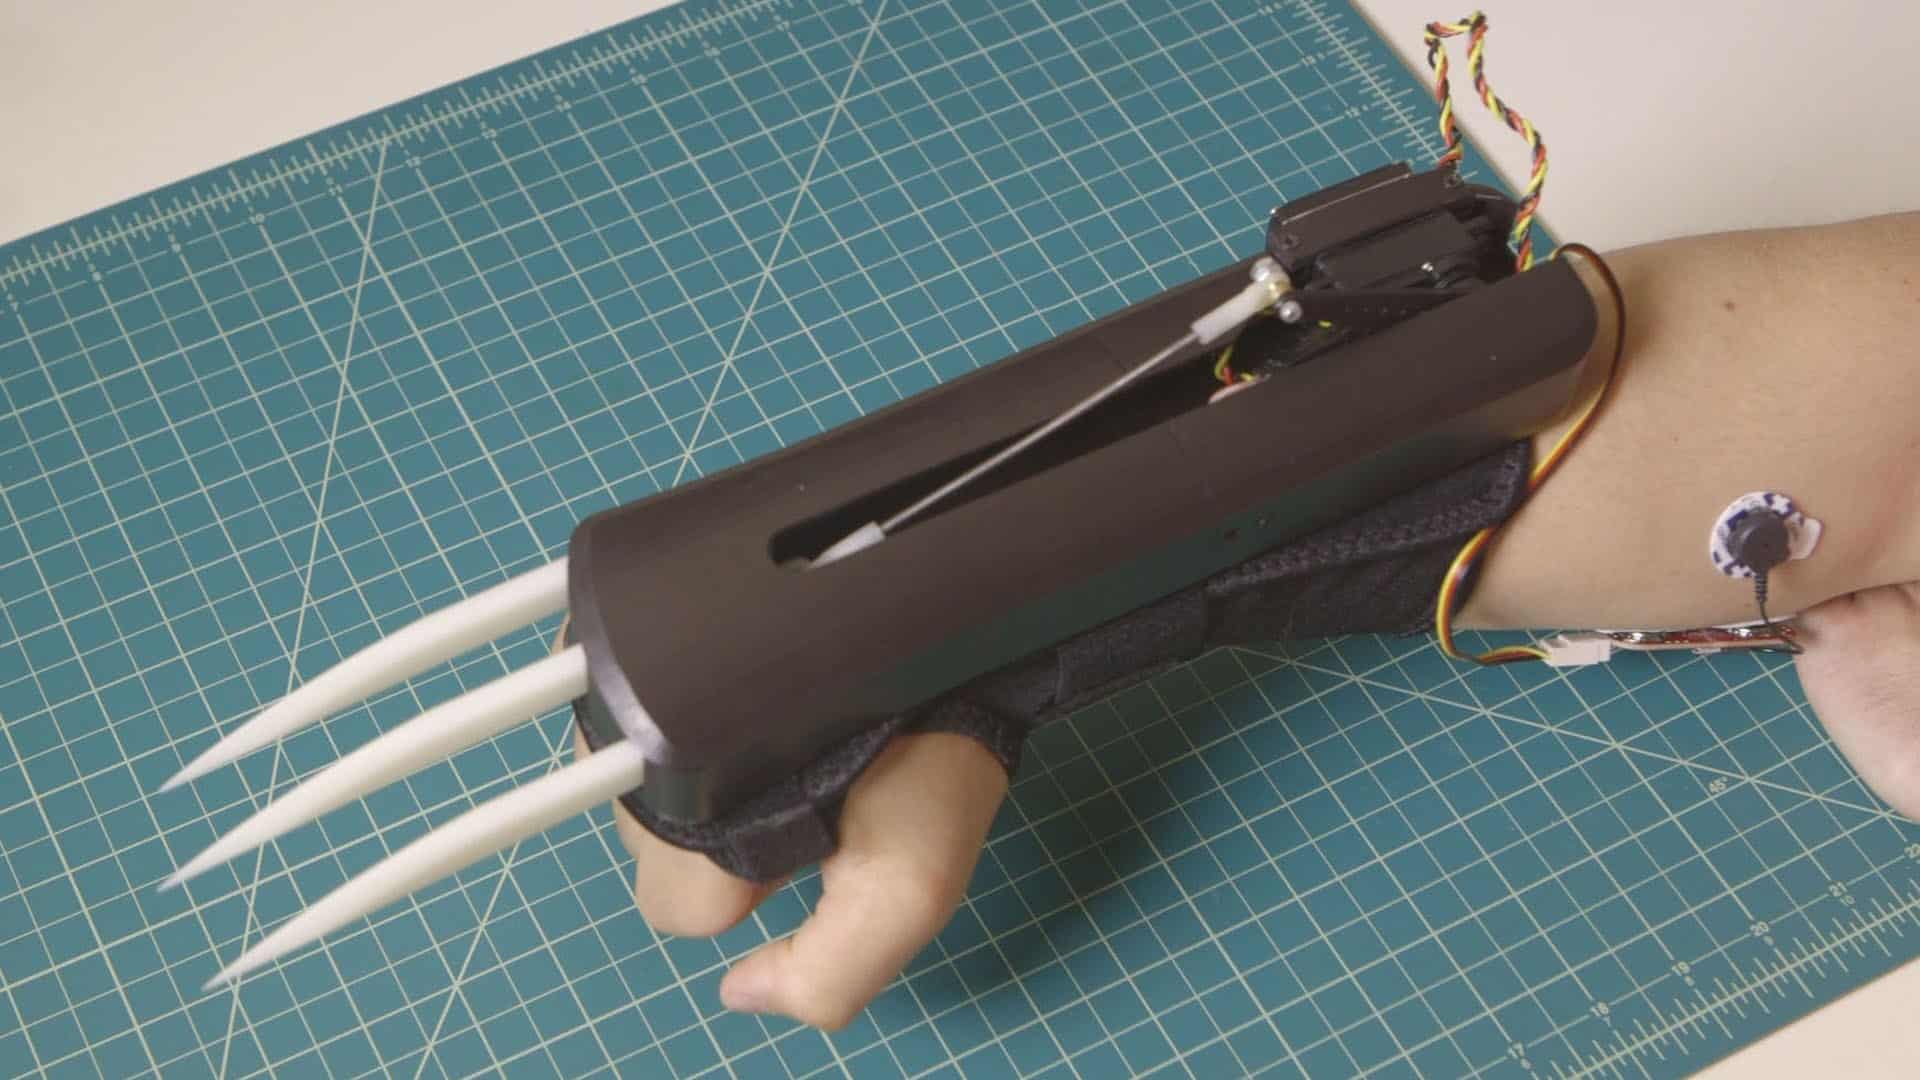 Build your own automatic Wolverine claws